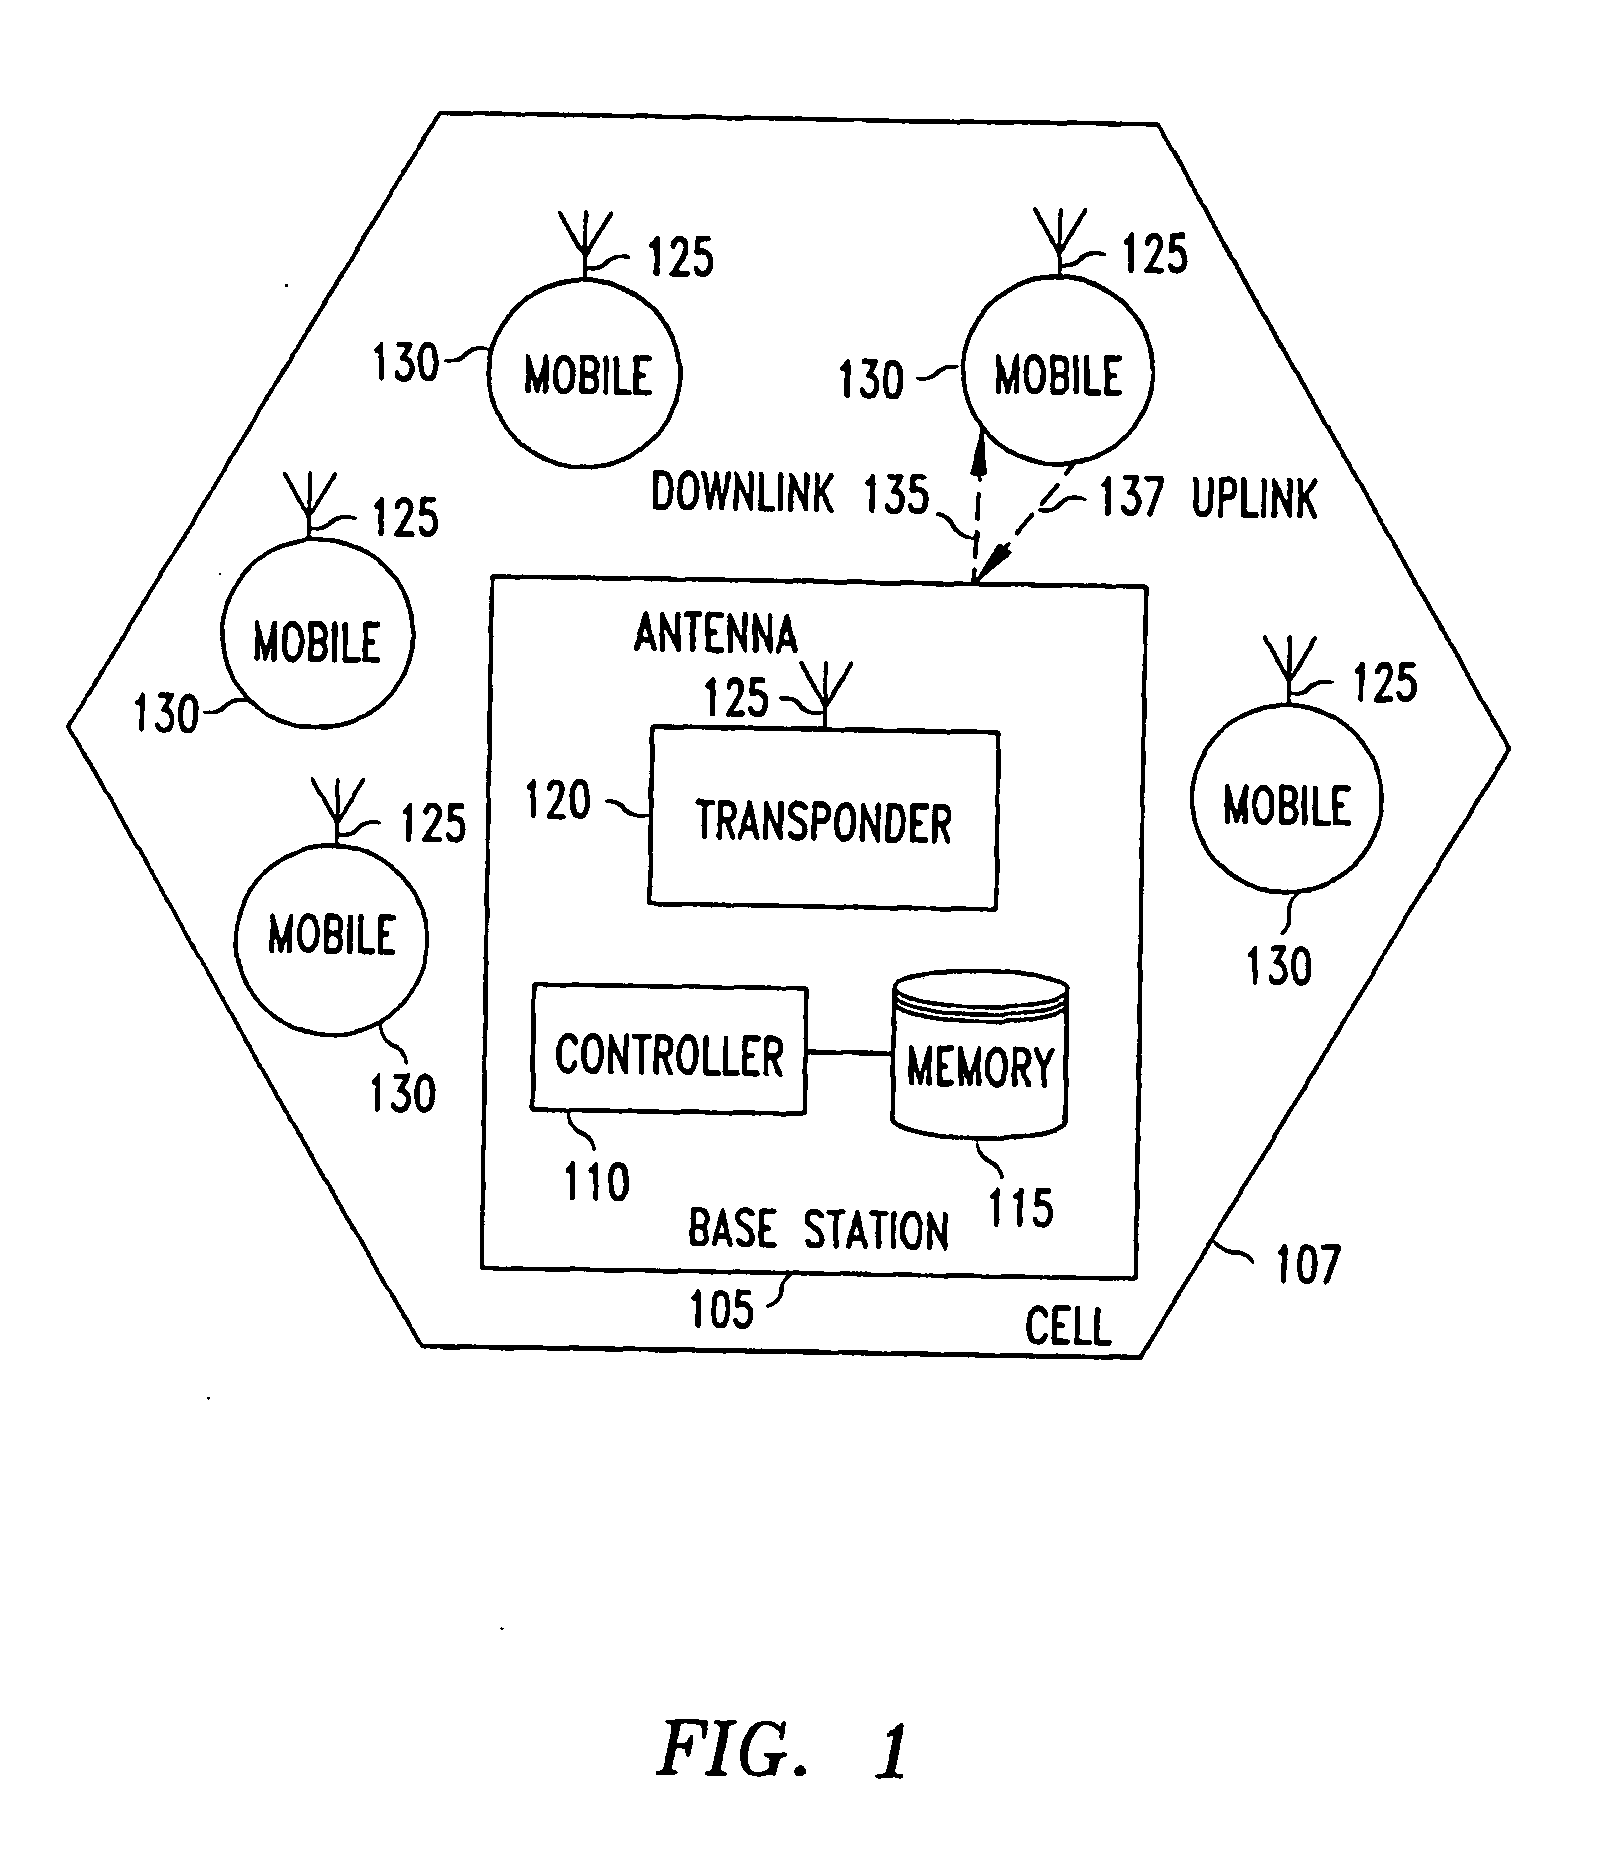 Method and system for integrated link adaptation and power control to improve error and throughput performance in wireless packet networks